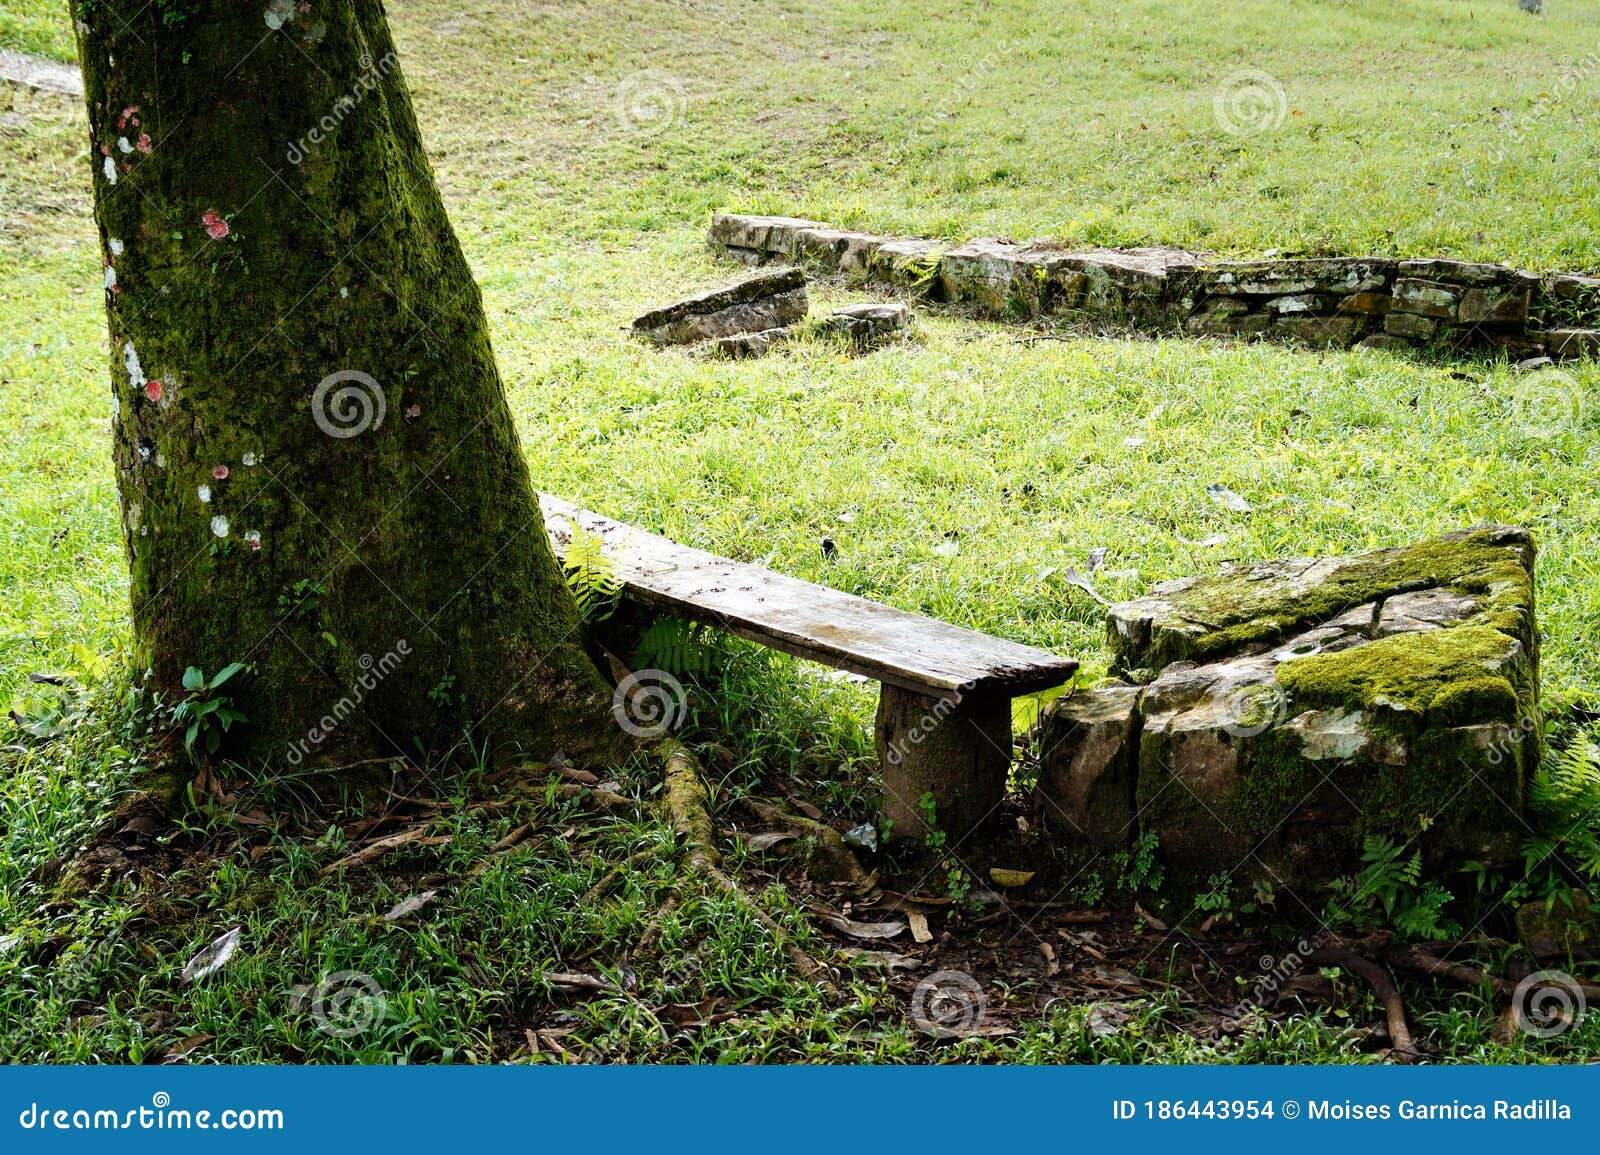 wooden bench under the shade of a tree in the middle of a garden ideal for rest and tranquility